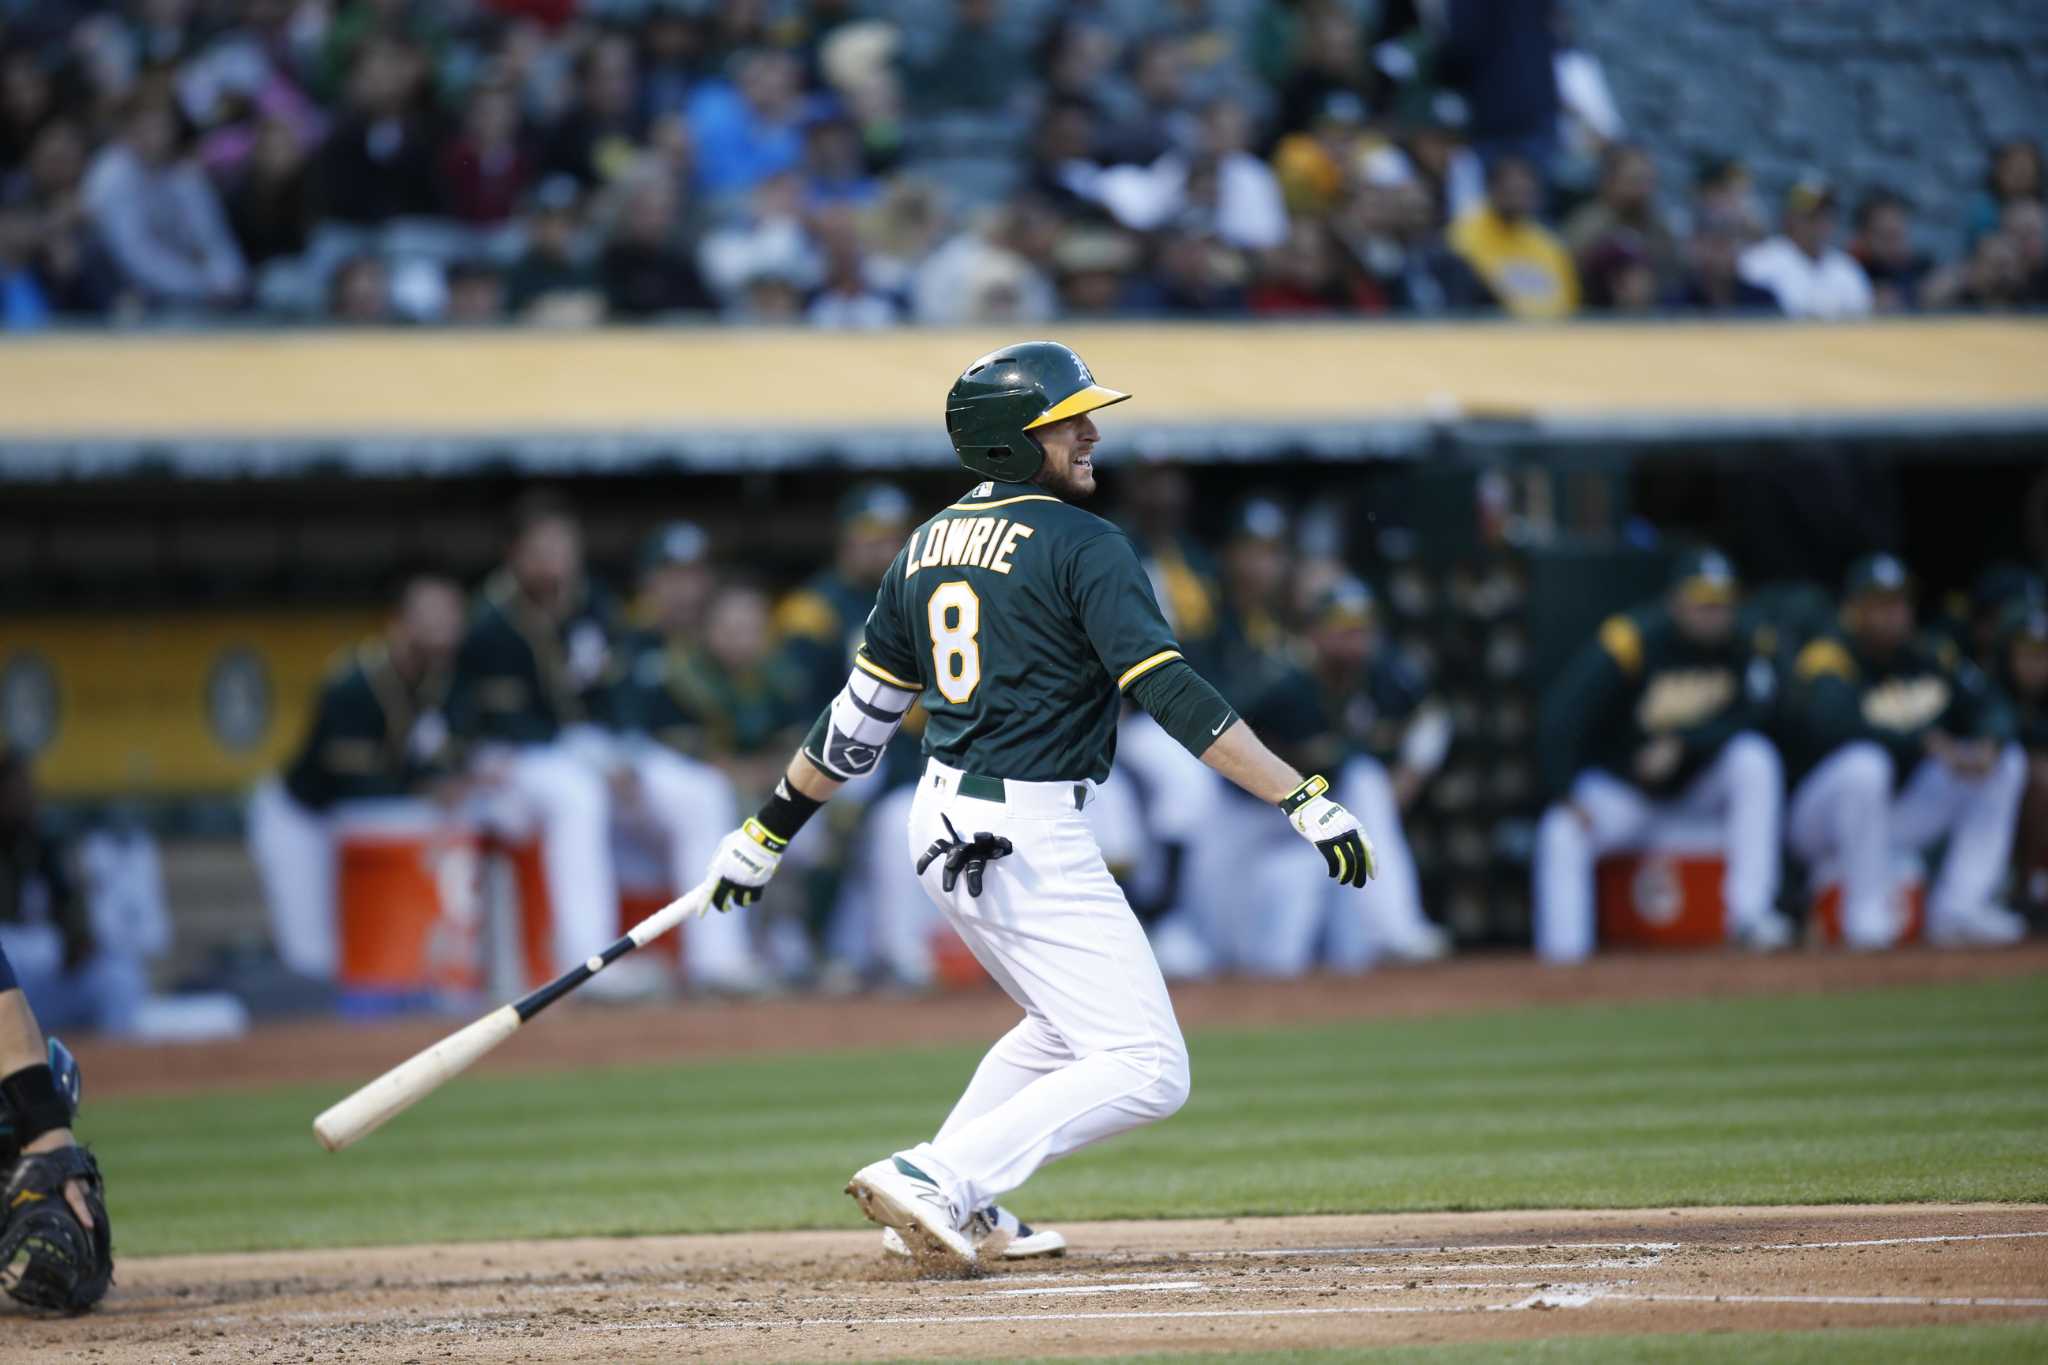 Oakland Athletics' Coco Crisp jogs in at batting practice during a News  Photo - Getty Images